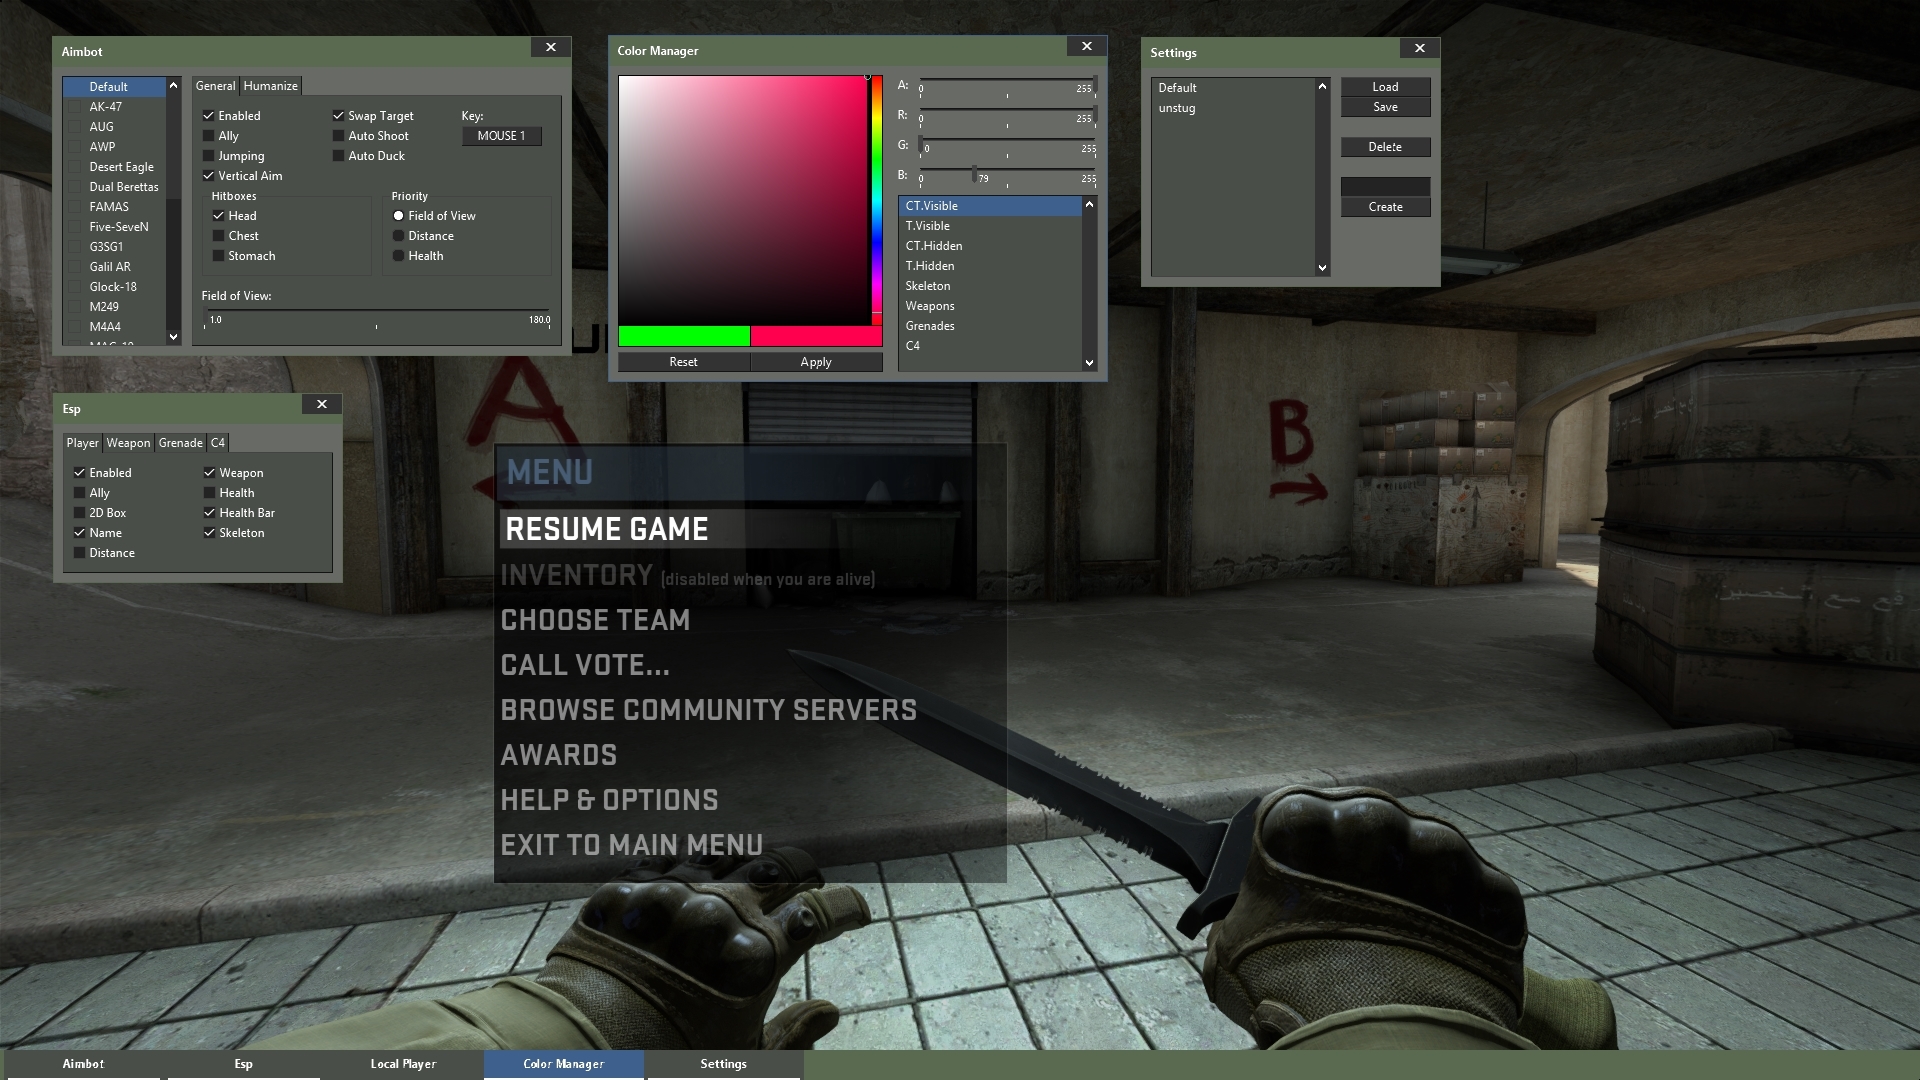 Rh Gui Theme General Discussion Royal Hack Cheats For Csgo